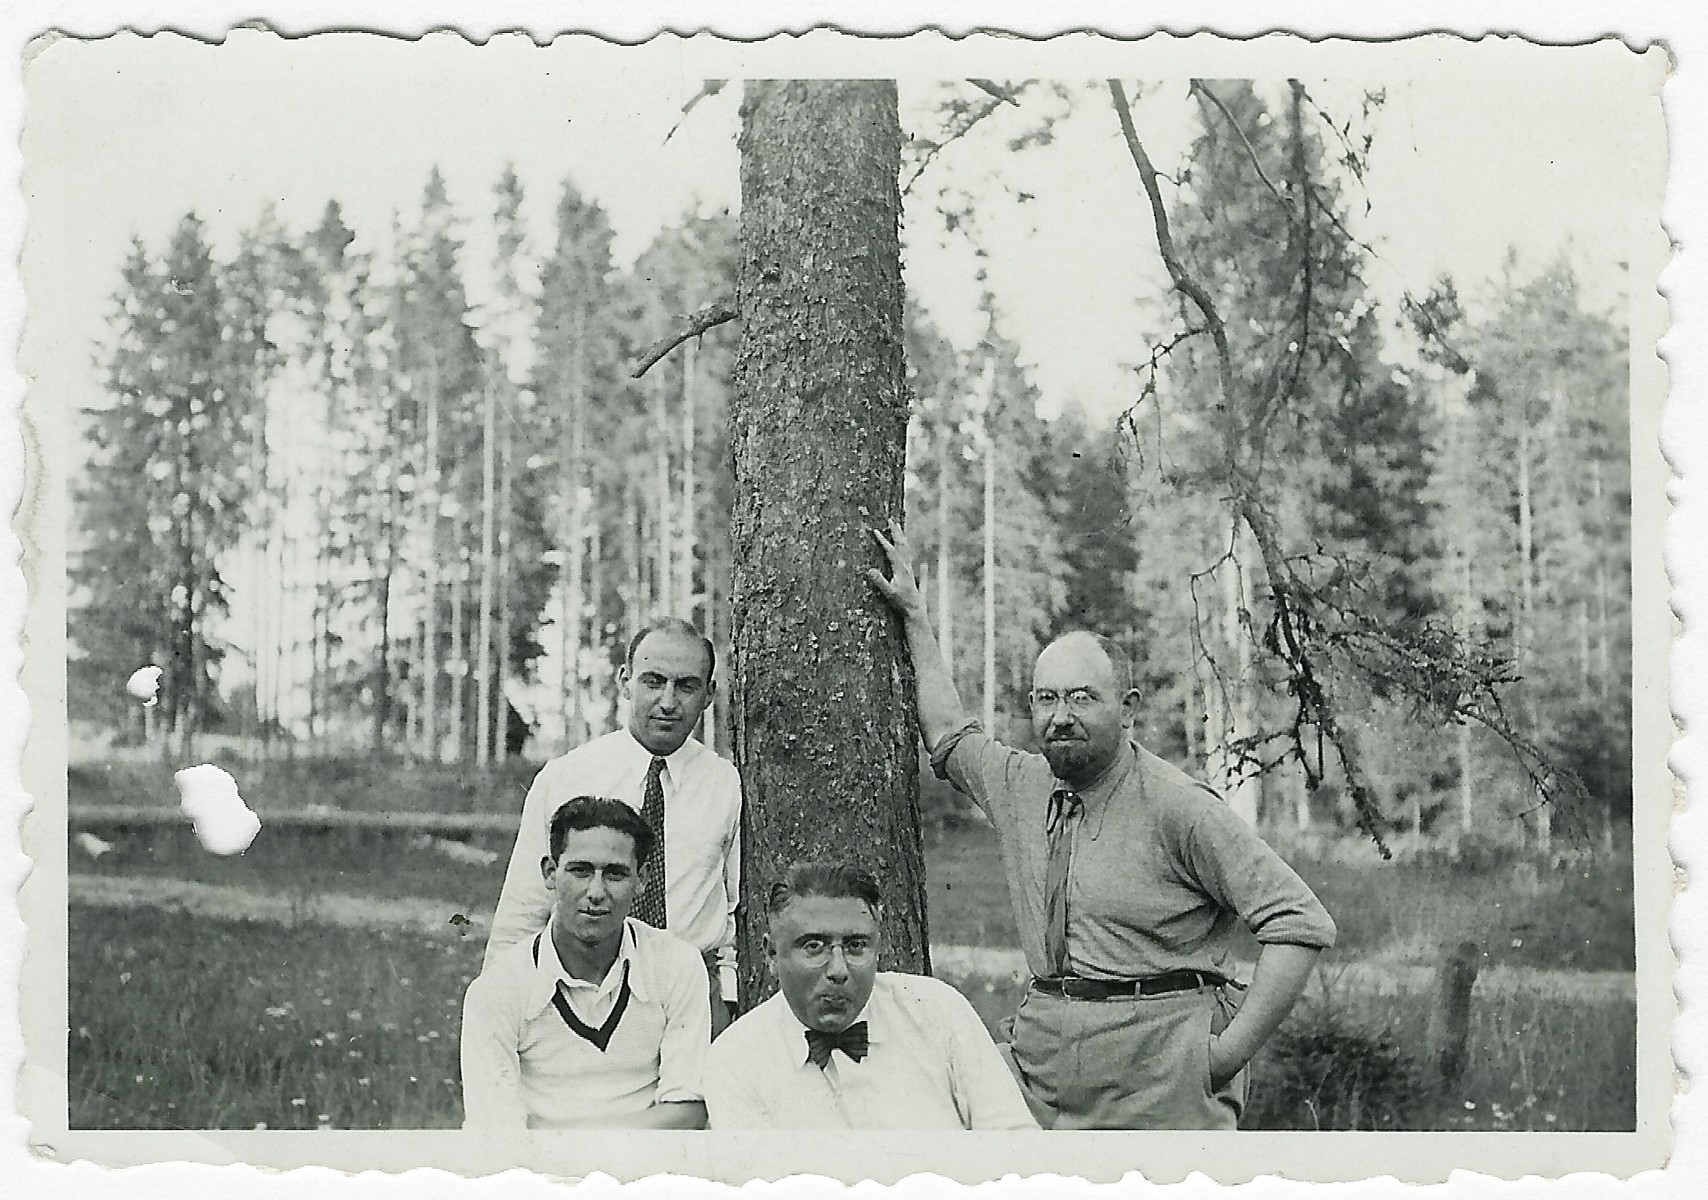 Four Lithuanian-Jewish friends gather in a park near Birstonas.

Among those pictured are Moisei Kopelman (seated right) and Dr. Benjamin Zacharin (standing far right.)  Dr. Zacharin later became head of health department of the Kovno ghetto.